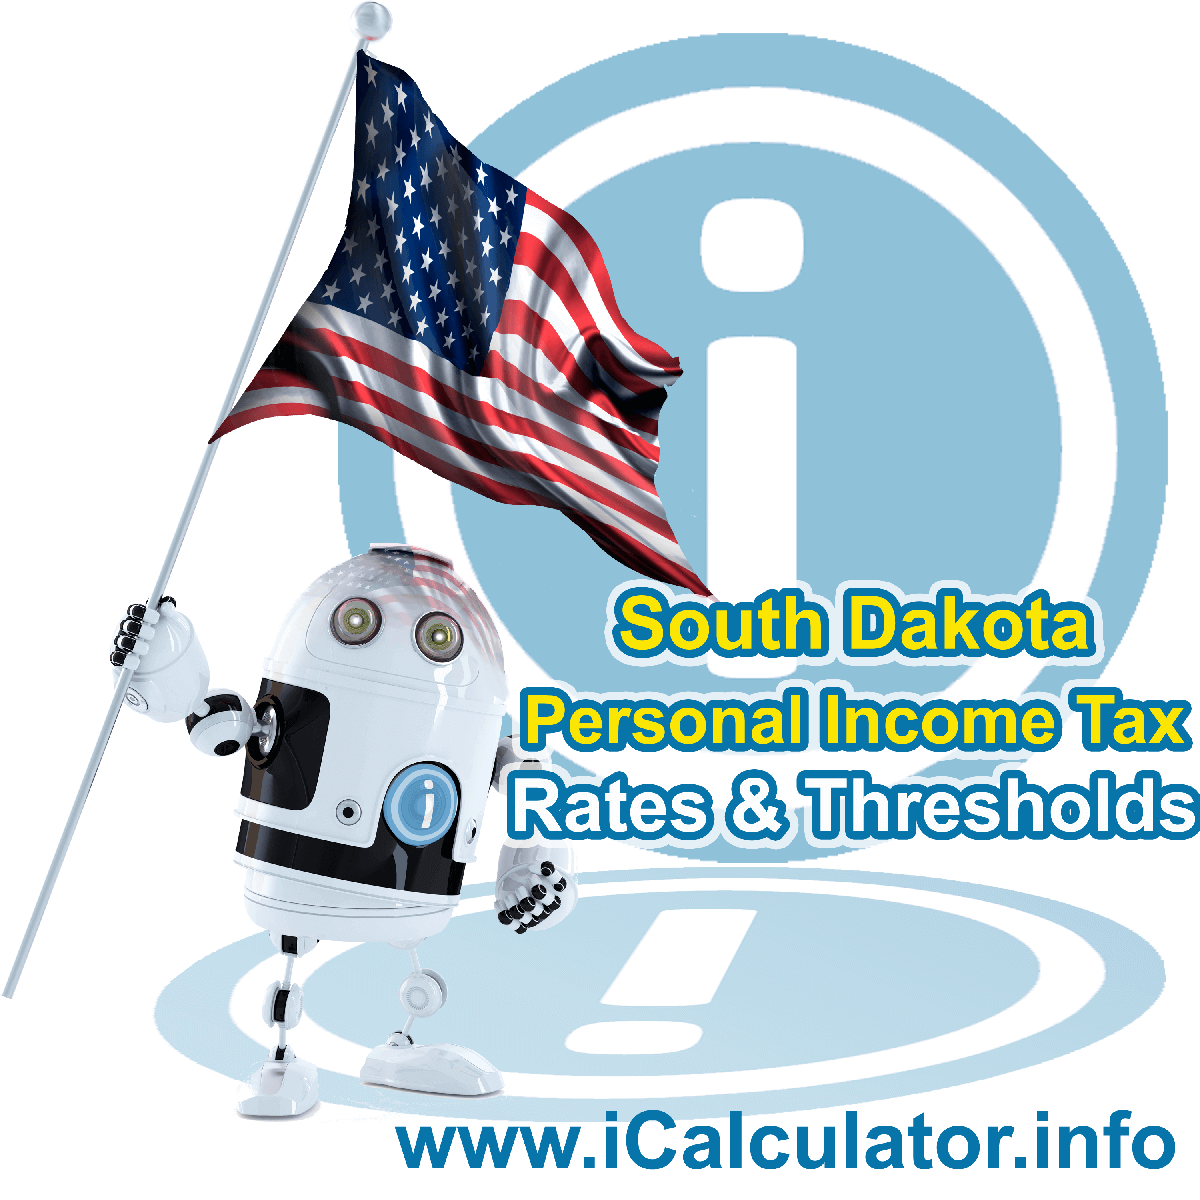 South Dakota State Tax Tables 2017. This image displays details of the South Dakota State Tax Tables for the 2017 tax return year which is provided in support of the 2017 US Tax Calculator